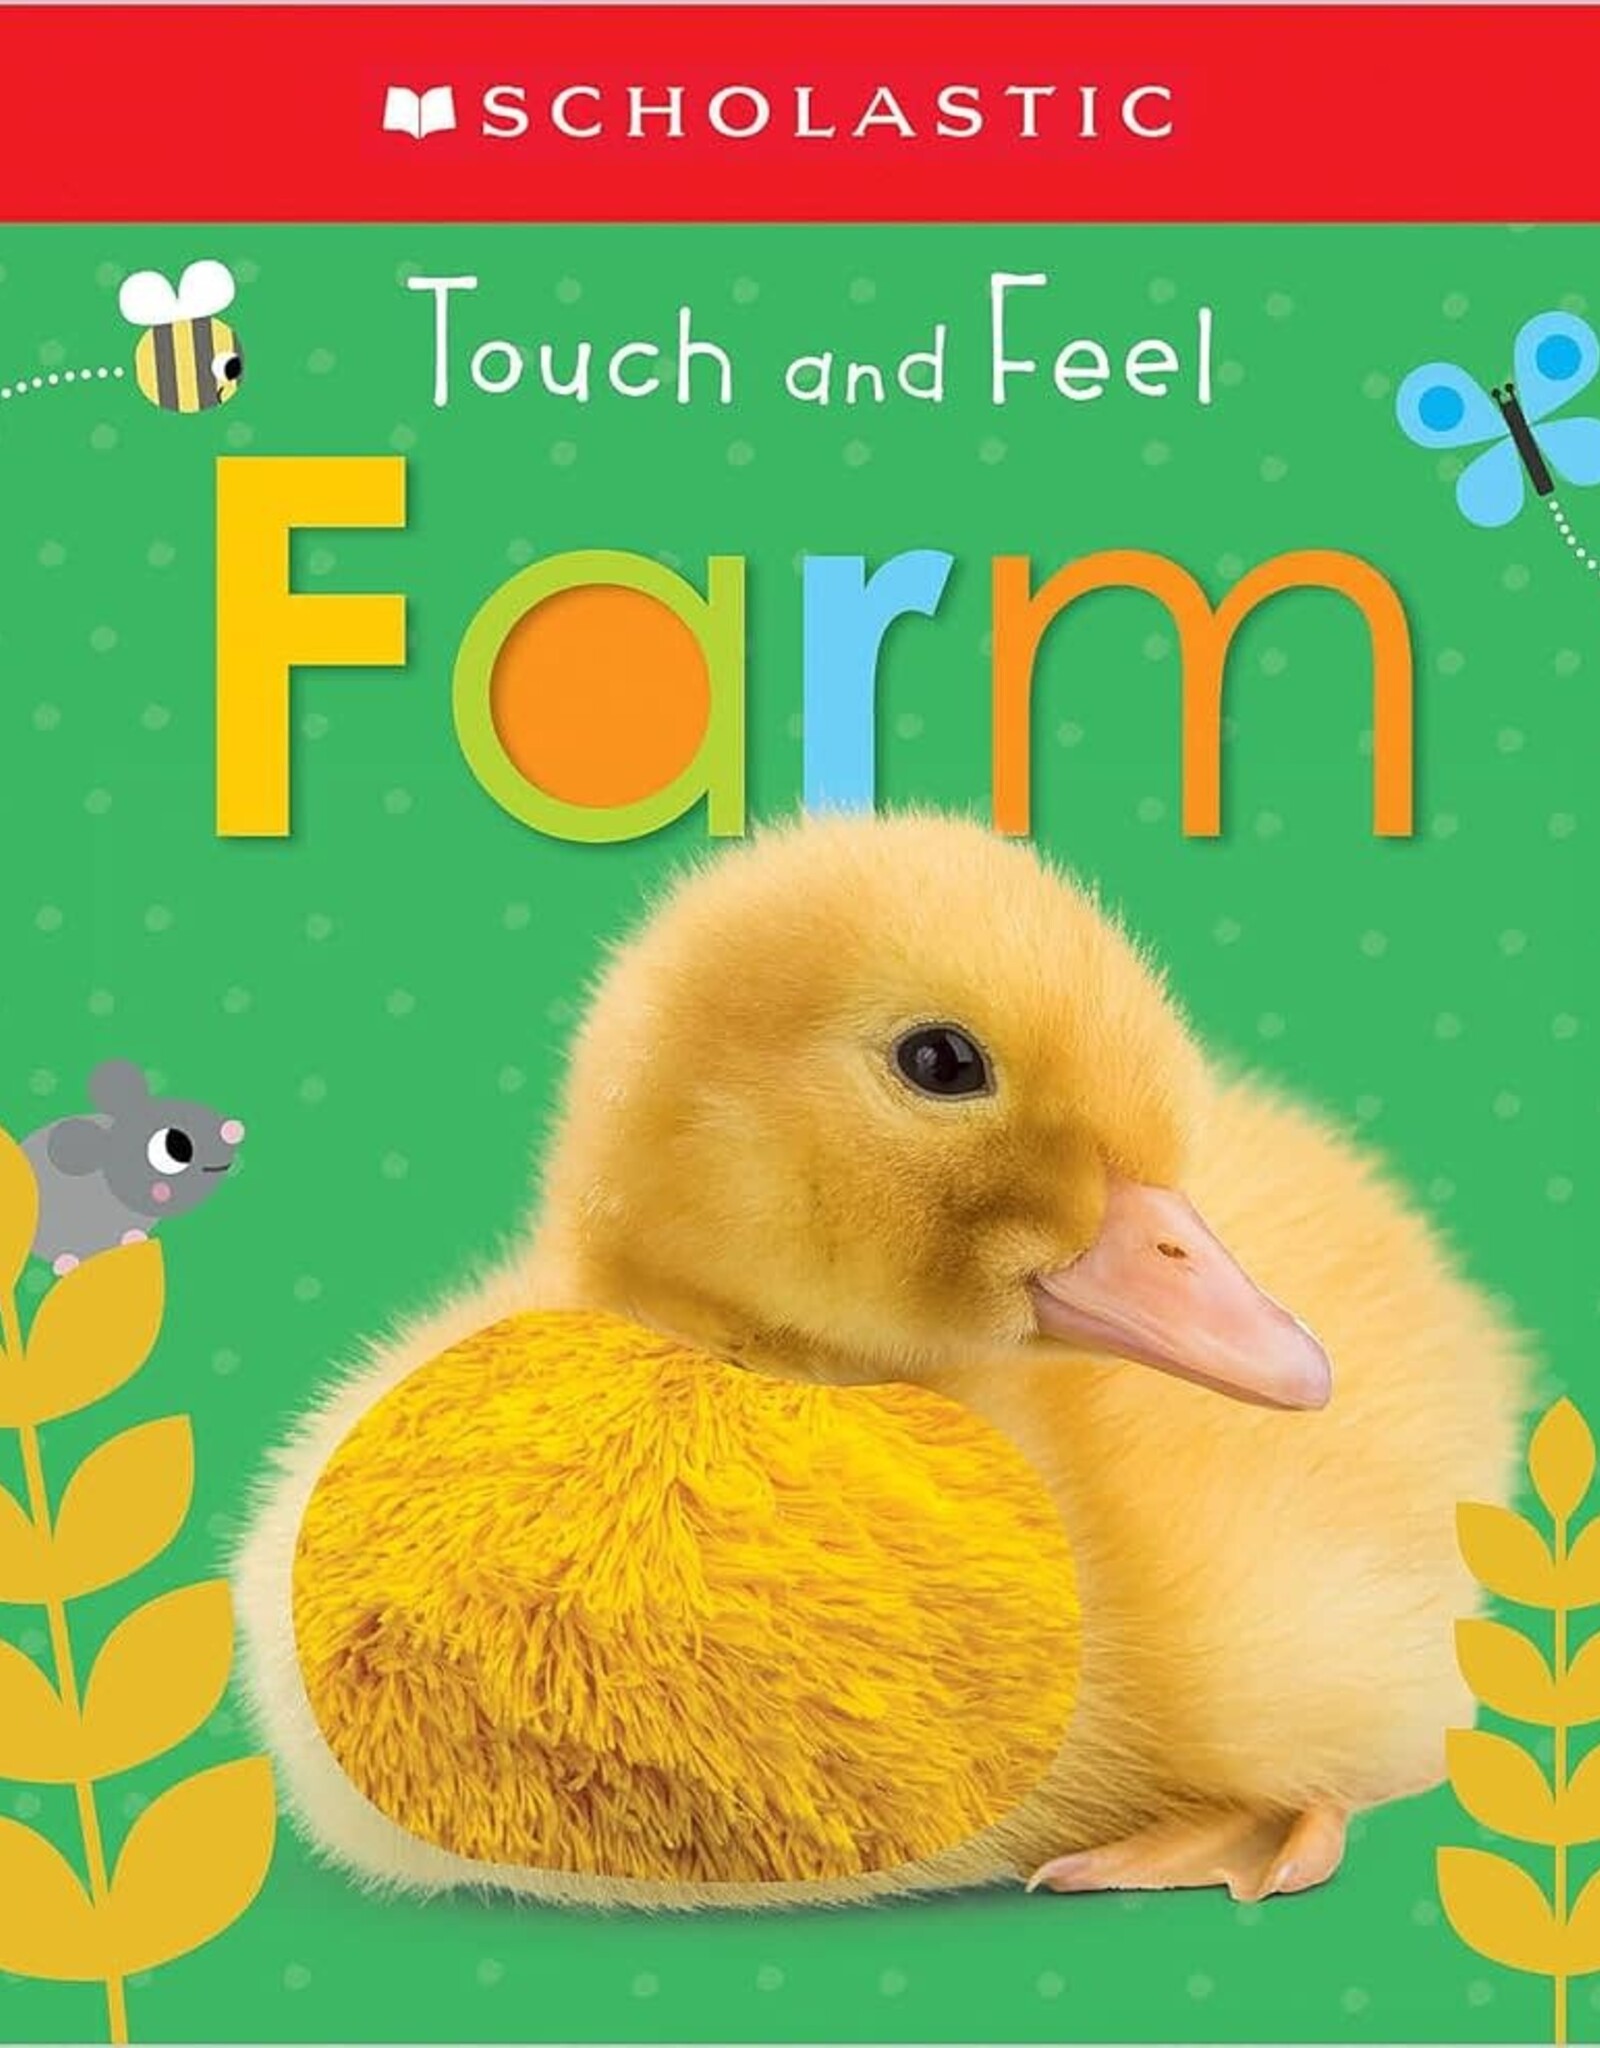 Scholastic Scholastic - Touch and Feel Farm